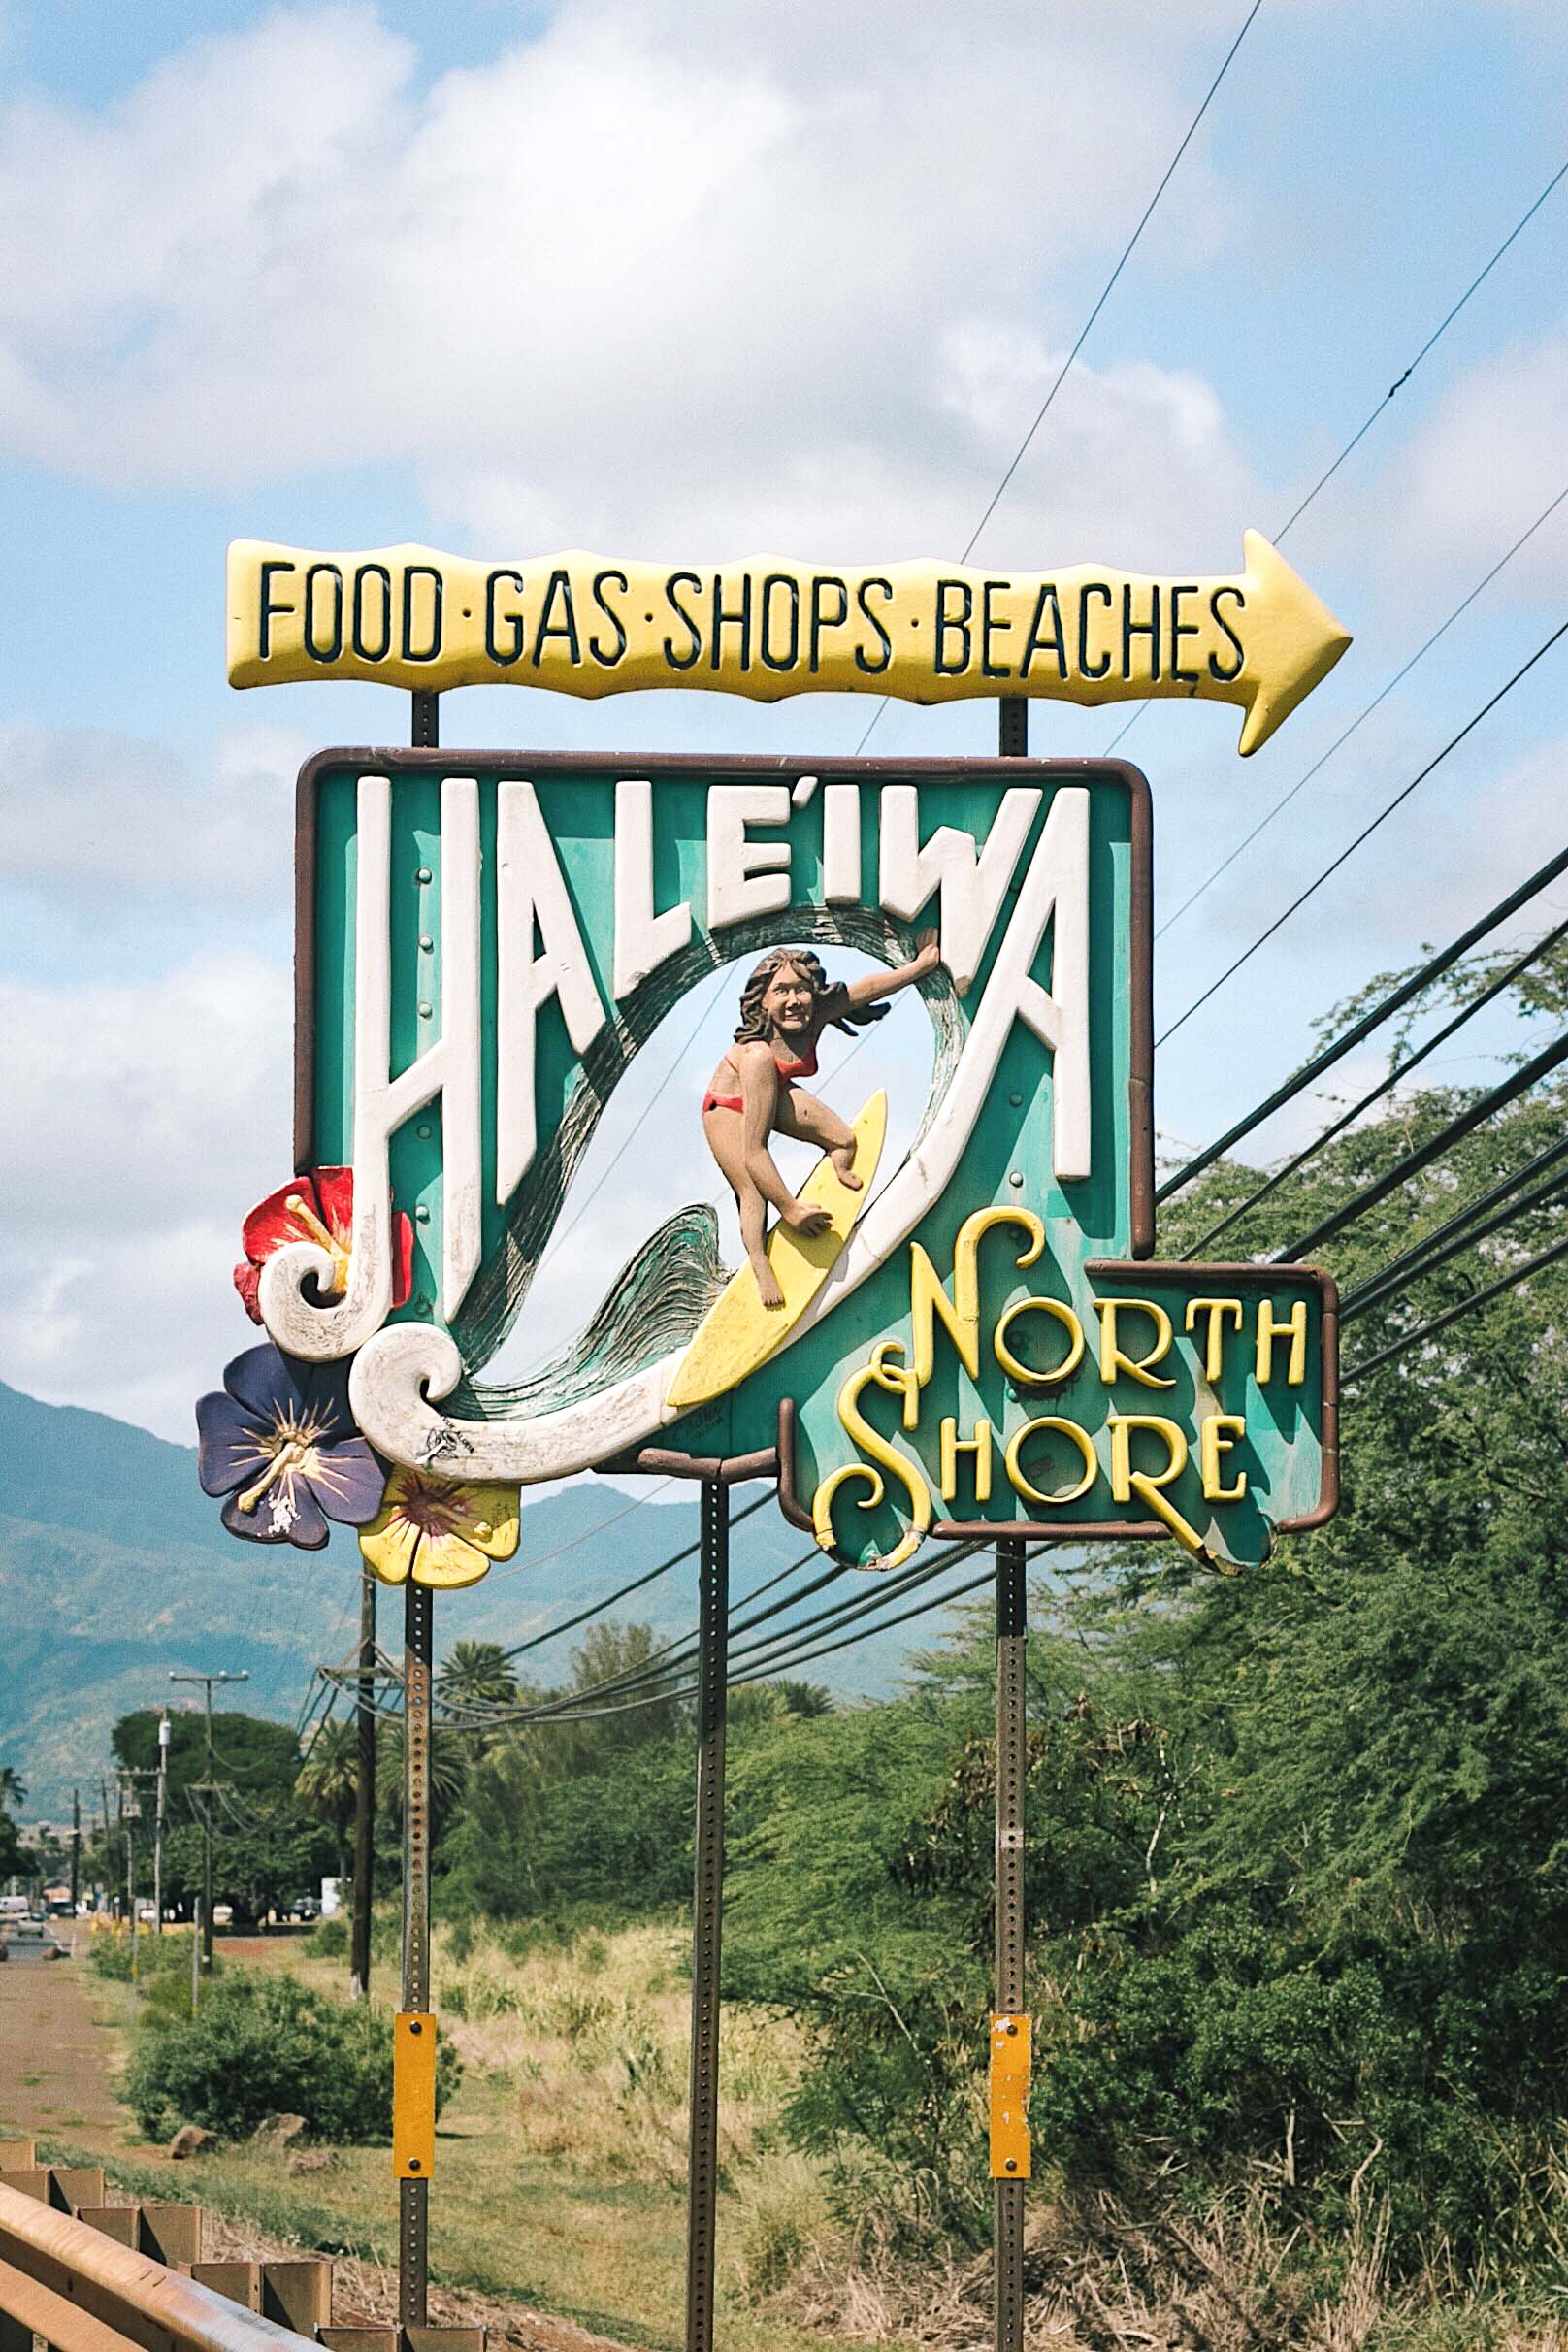 A local's guide to visiting North Shore Oahu